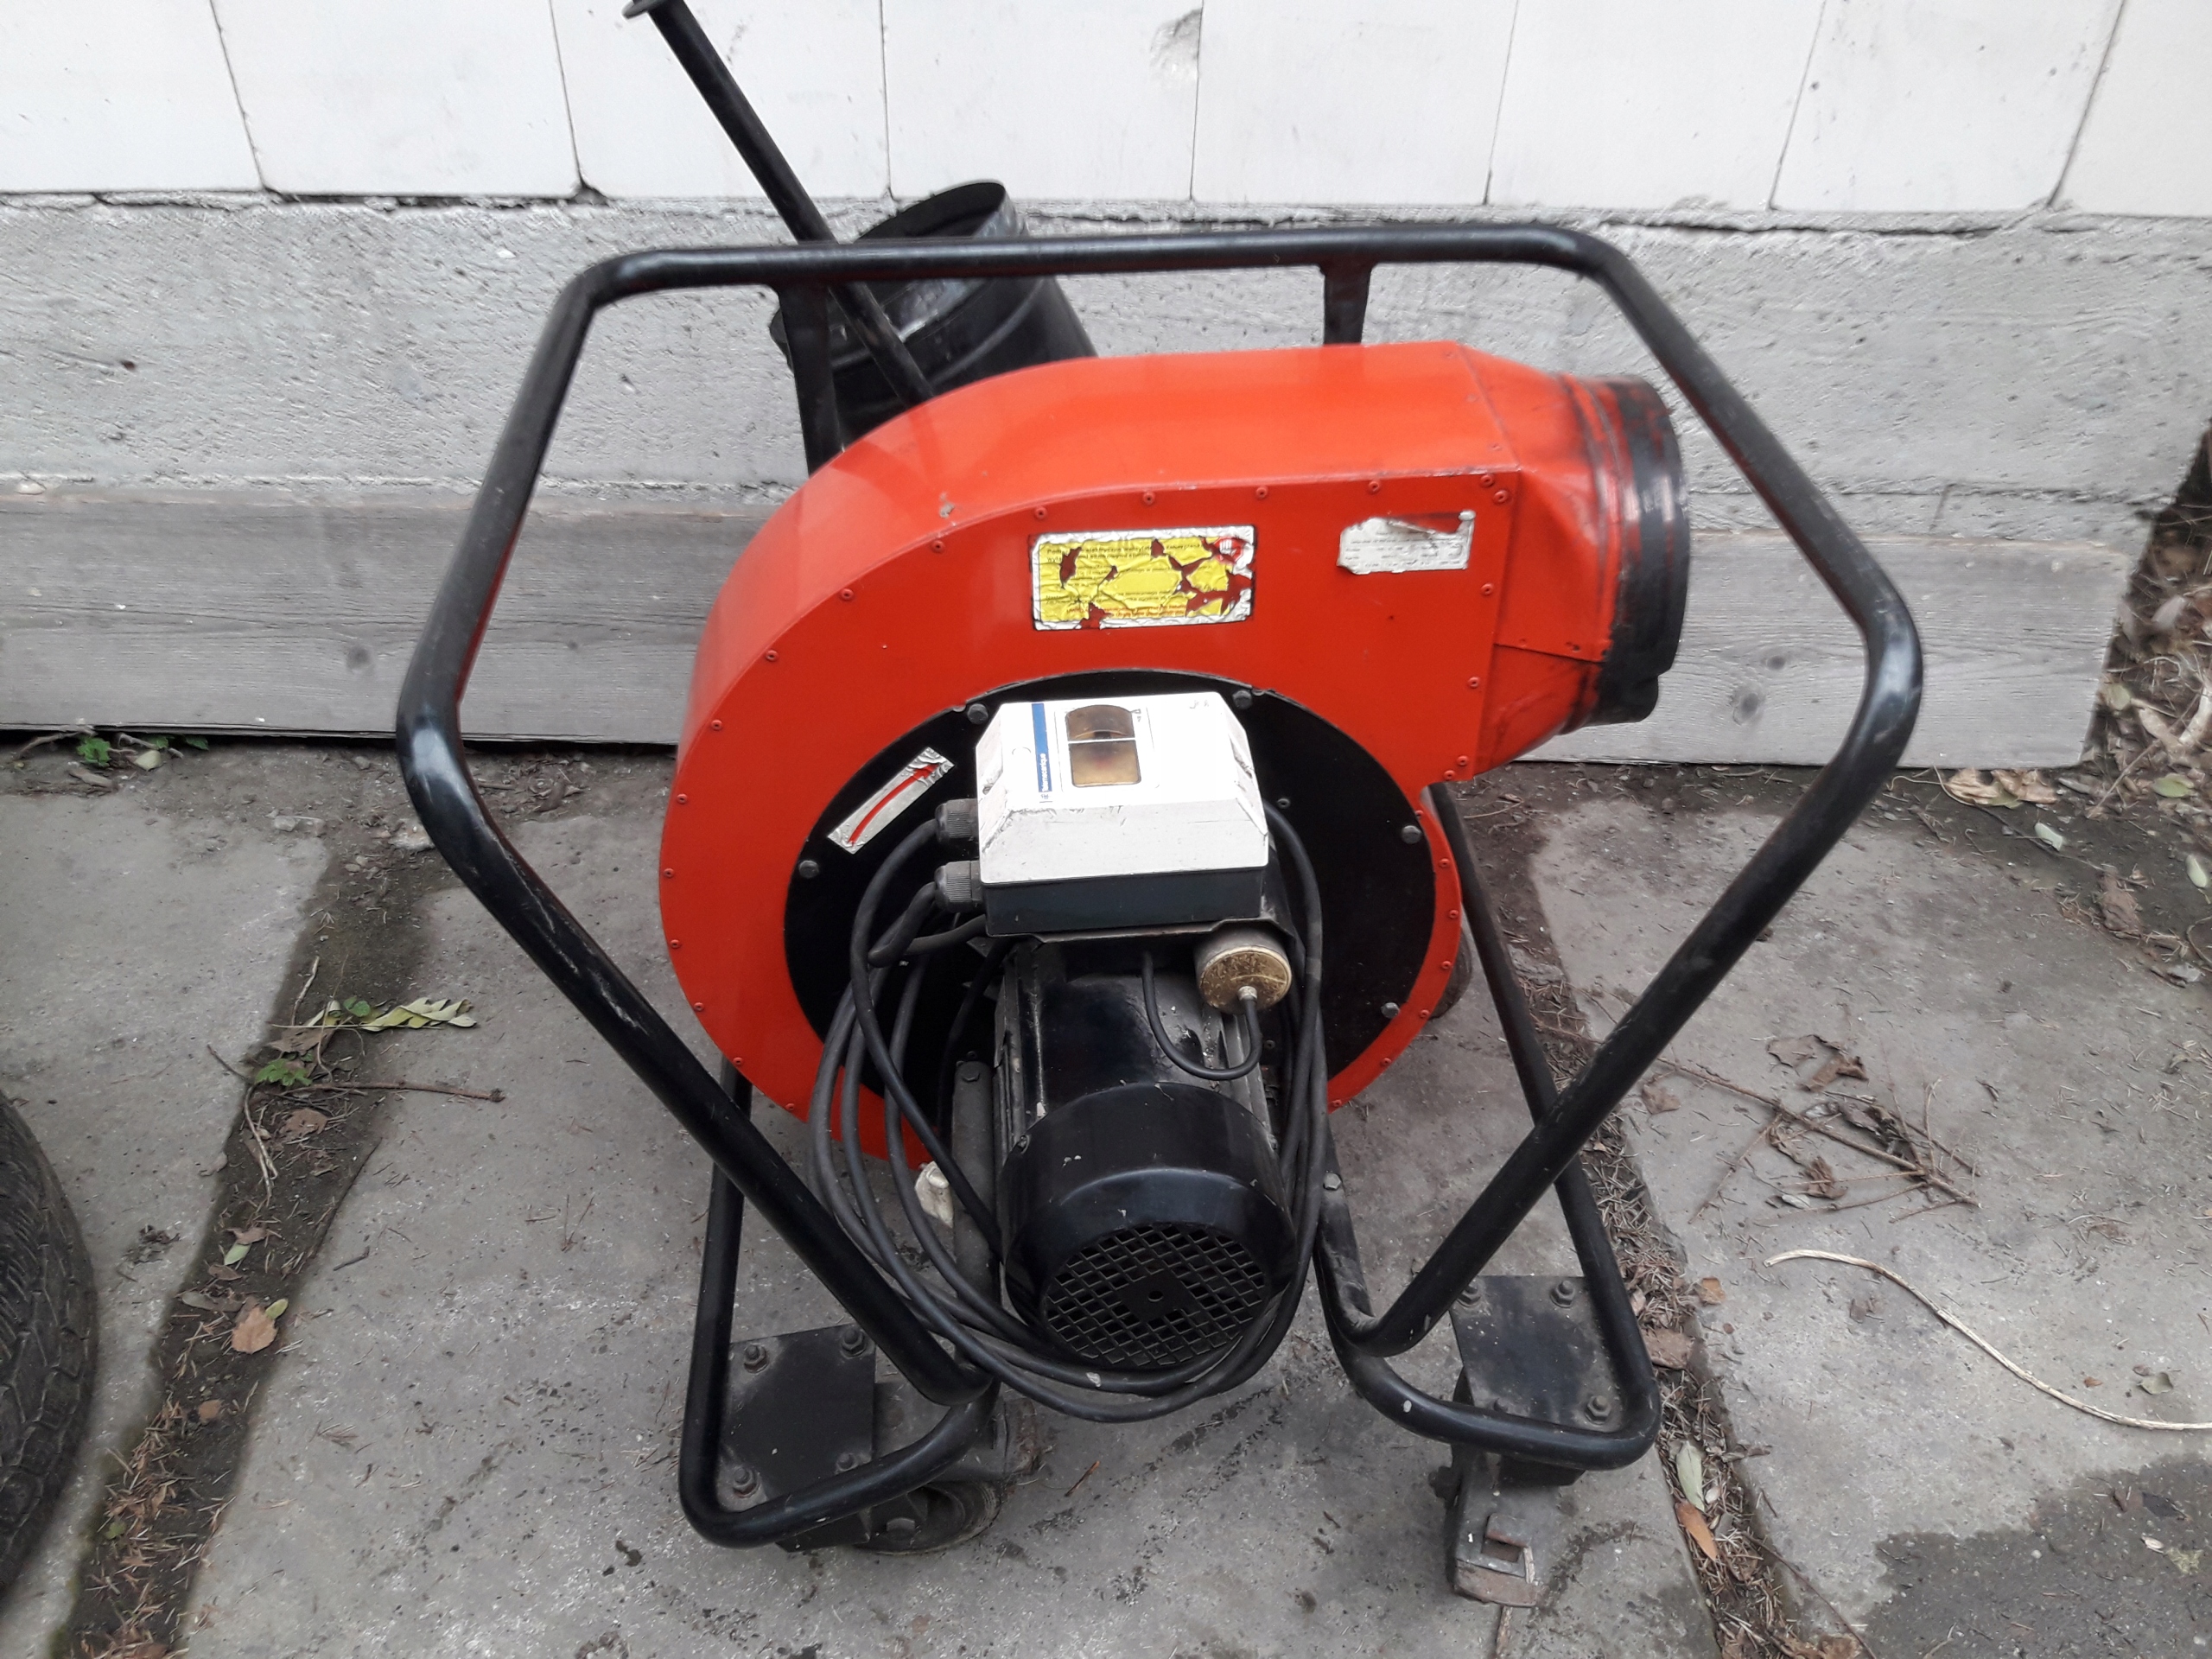 1.5HP DC3 Portable Dust Collector Motor Blower (no bag or hose)